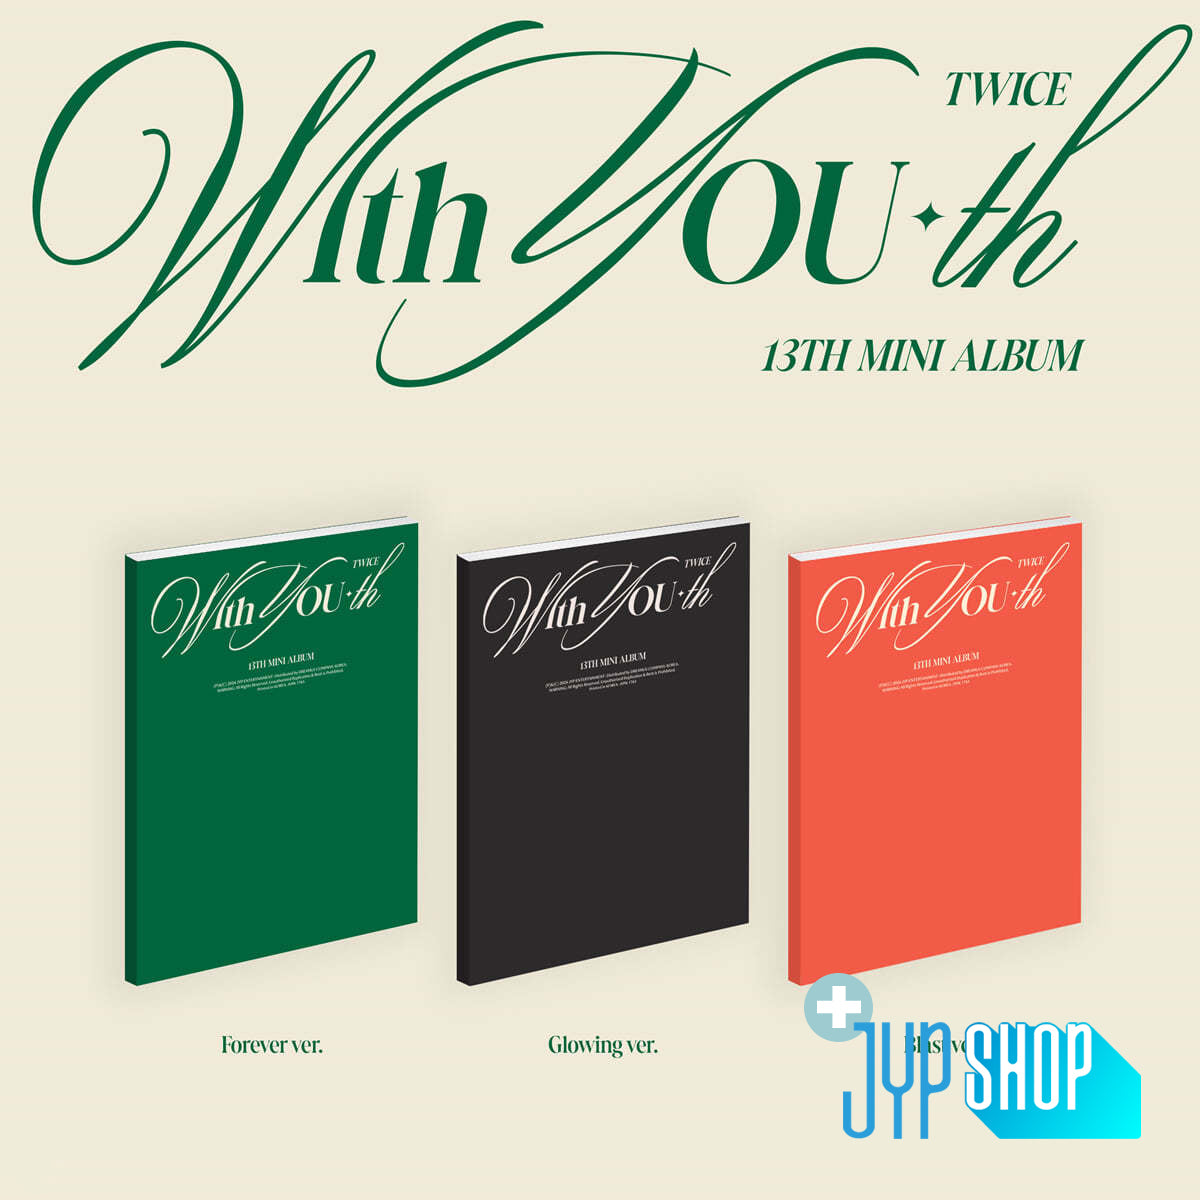 TWICE - With YOU-th + JYP SHOP P.O.B [PRE-ORDER]